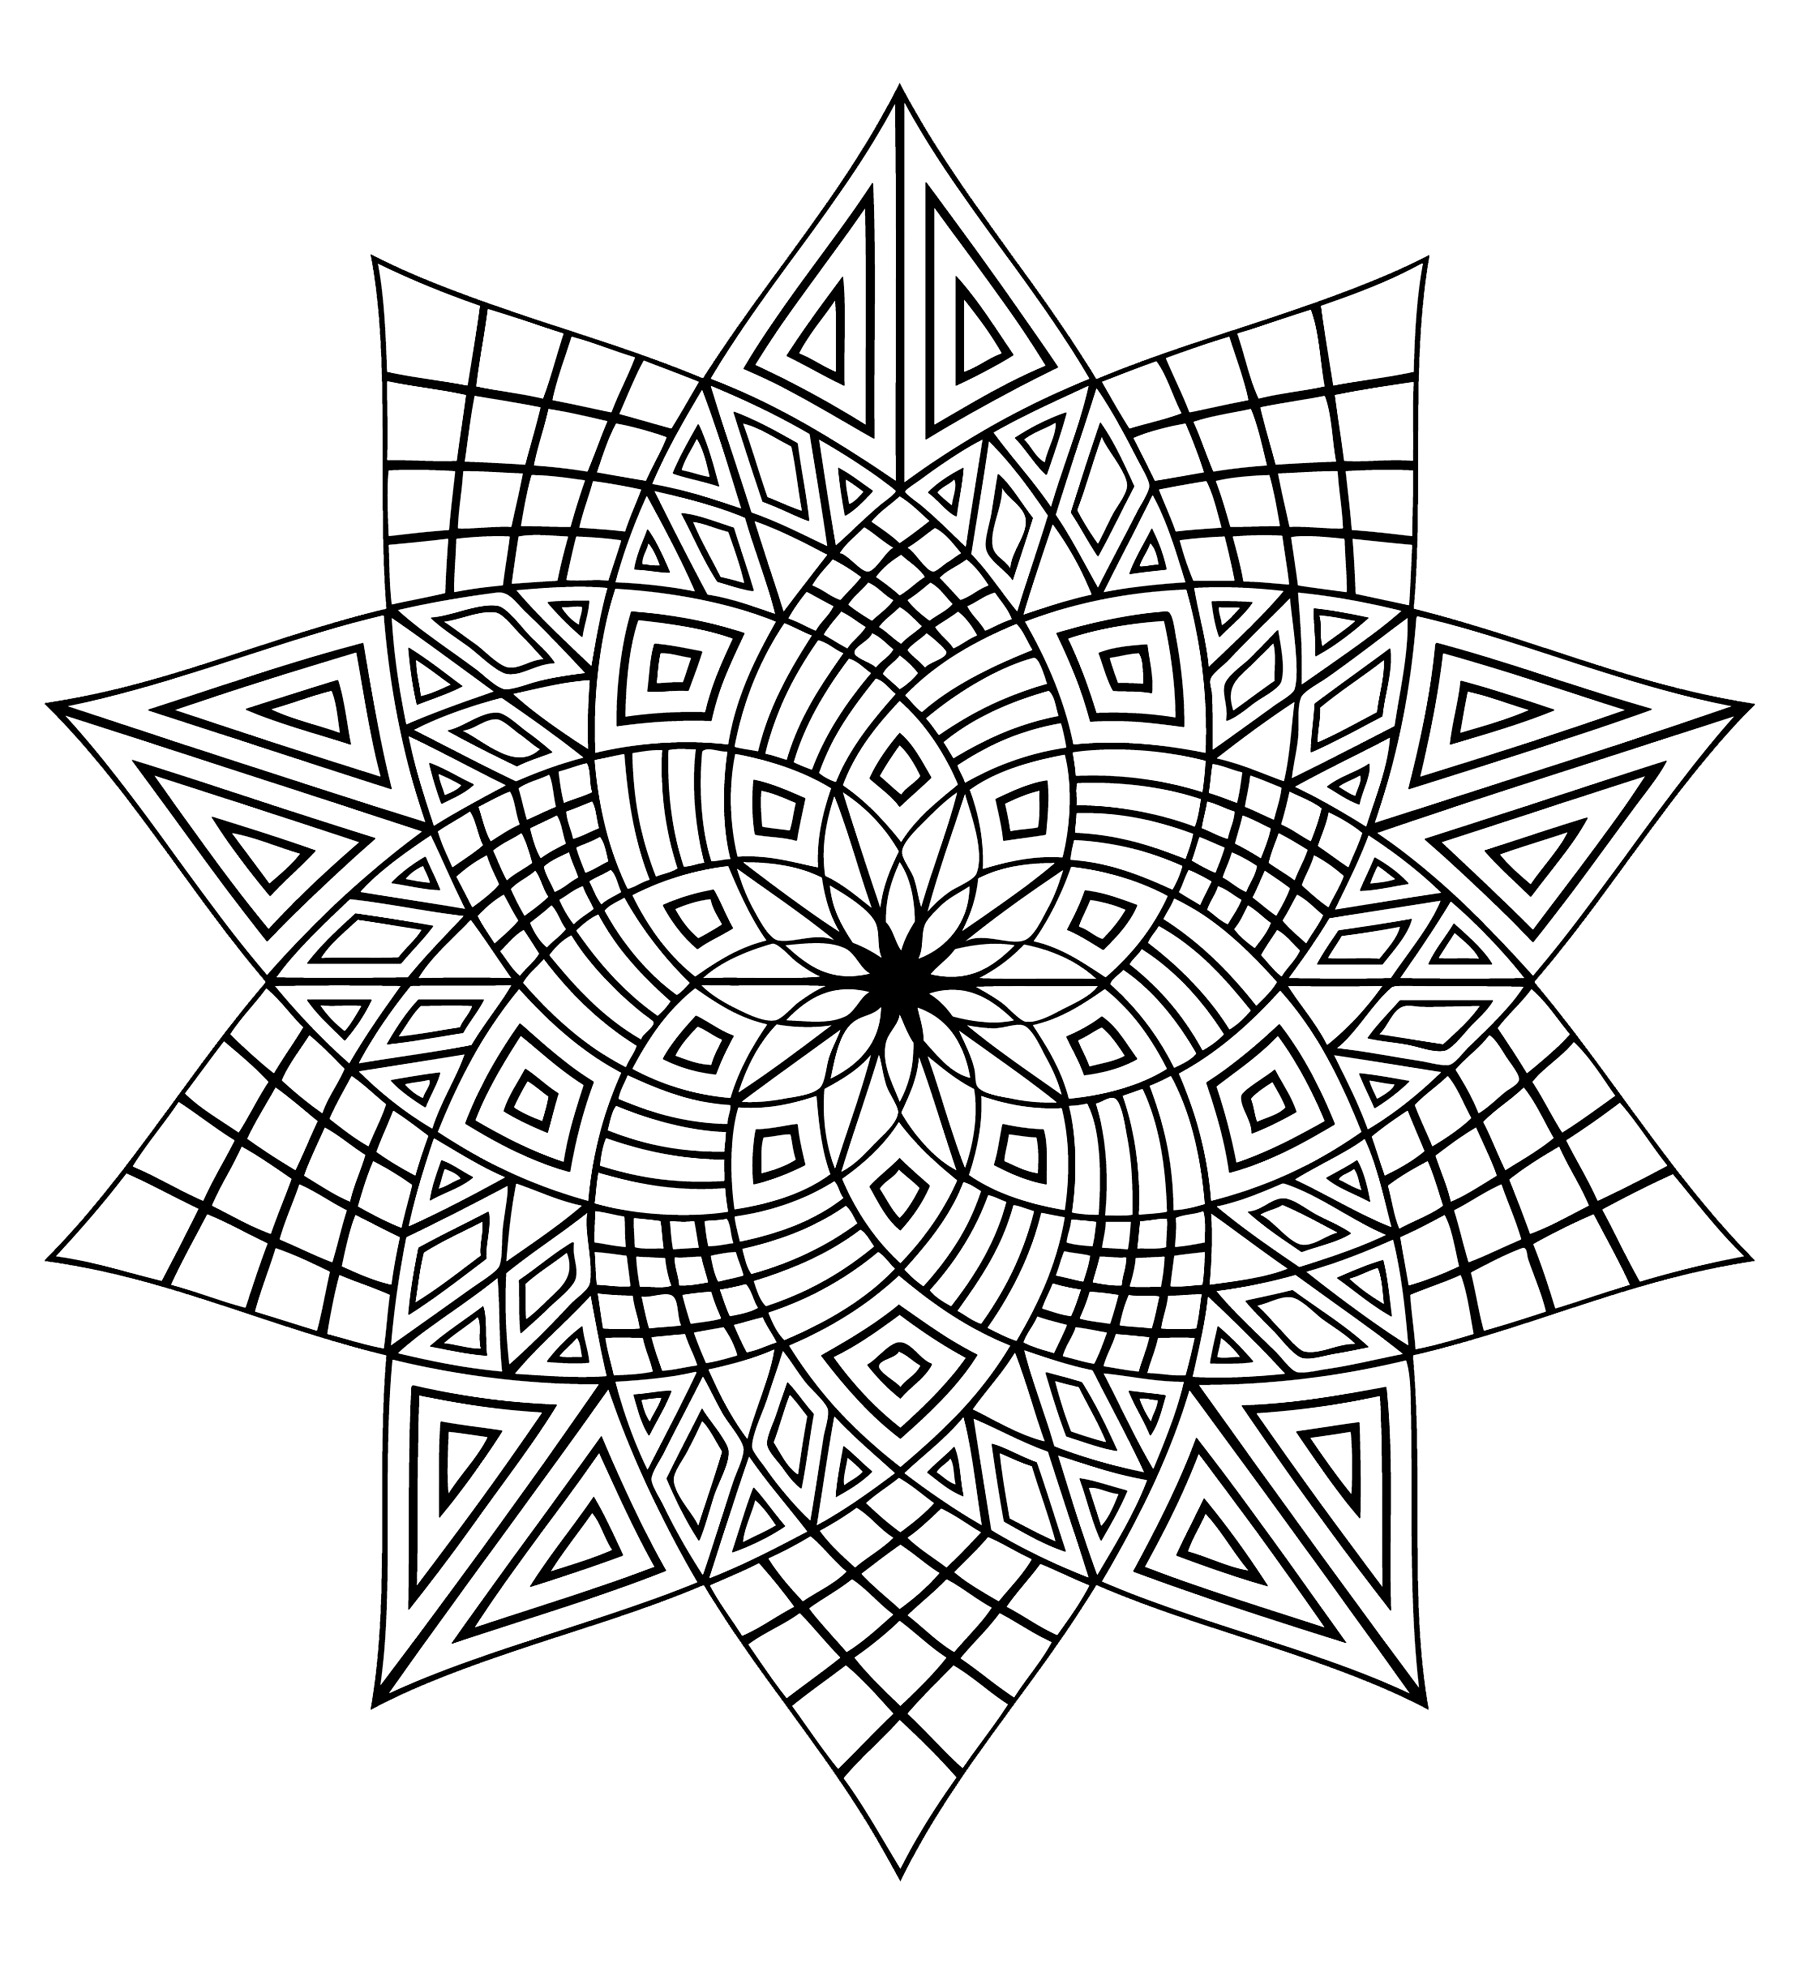 Mandala template forming a five-pointed star, with a lot of details